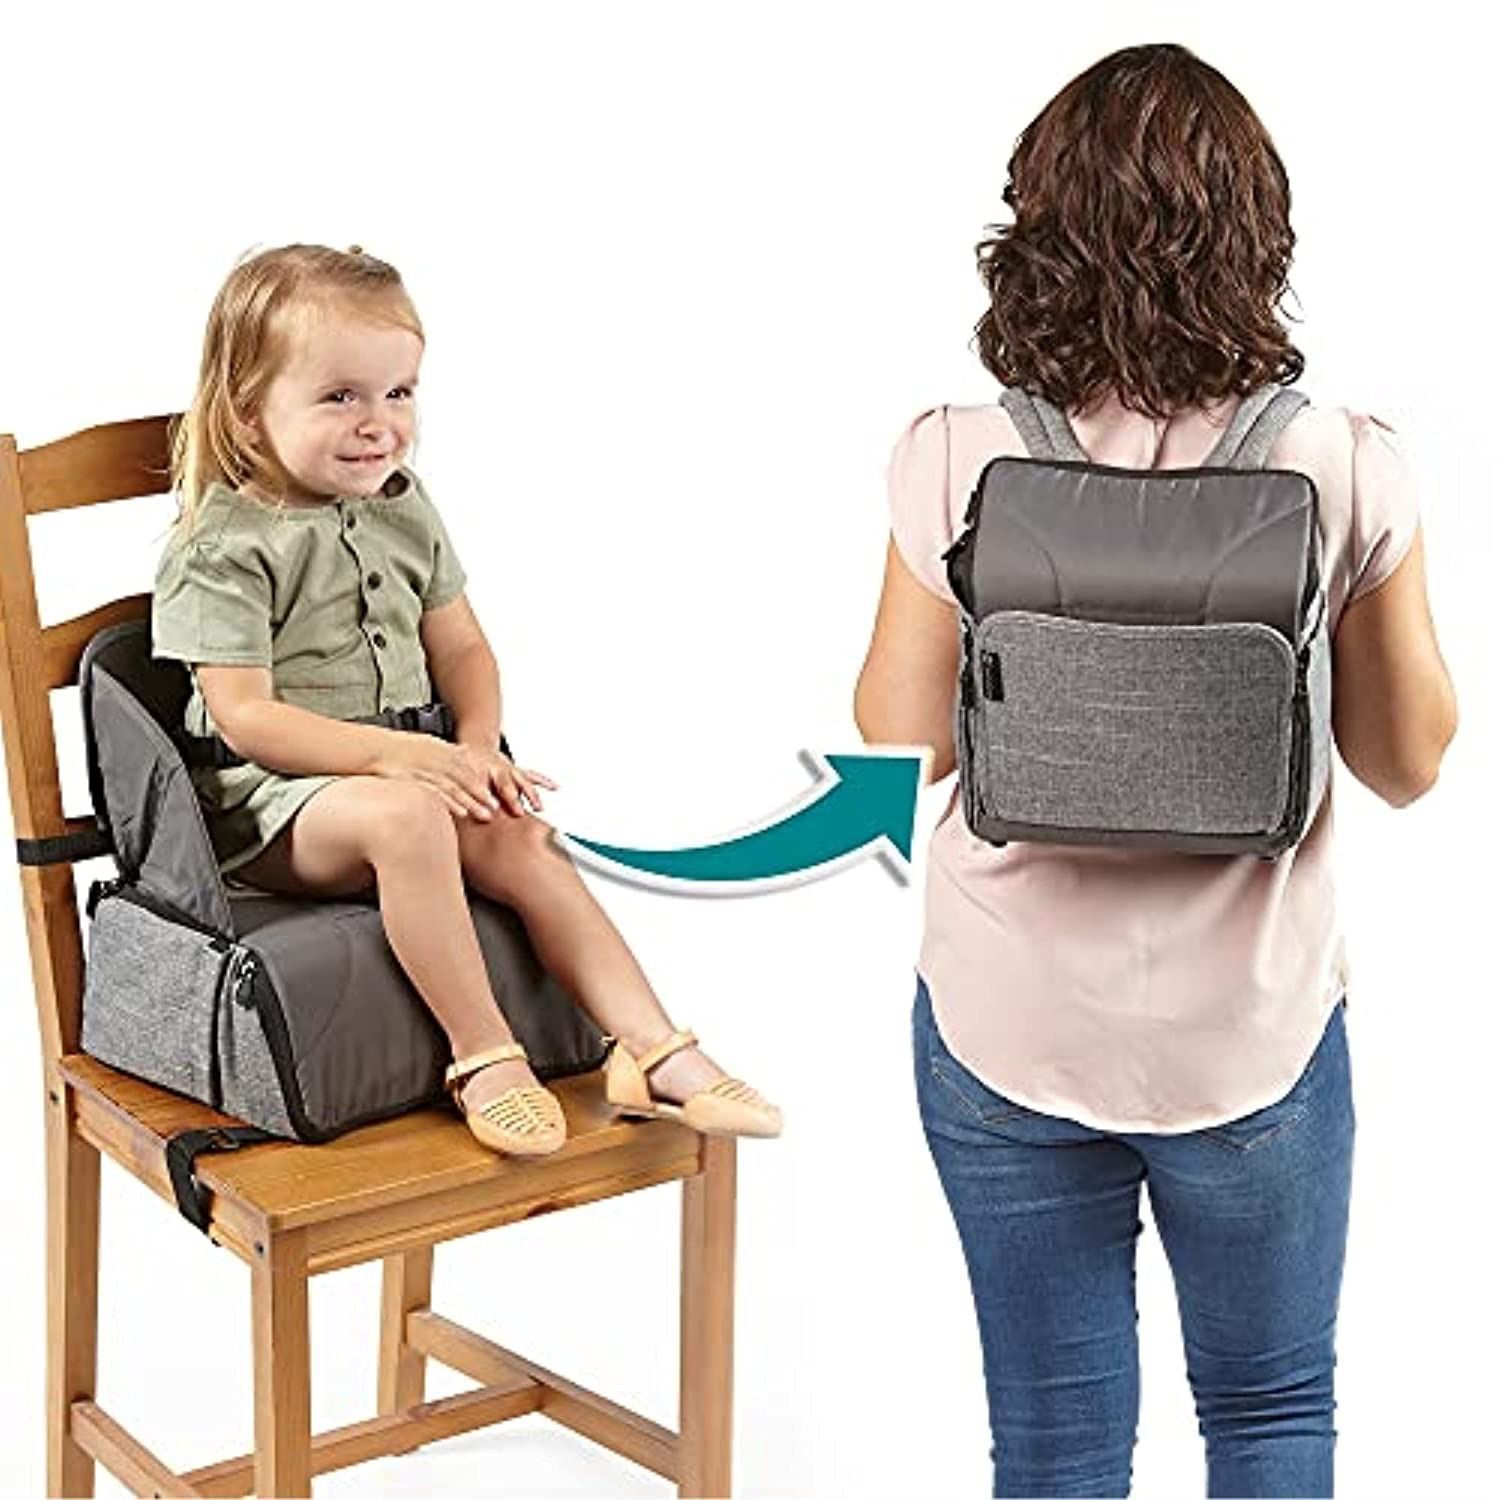 Baby-To-Love Pocket Chair Portable High-Chair for Travel Toddler Denim Edition 